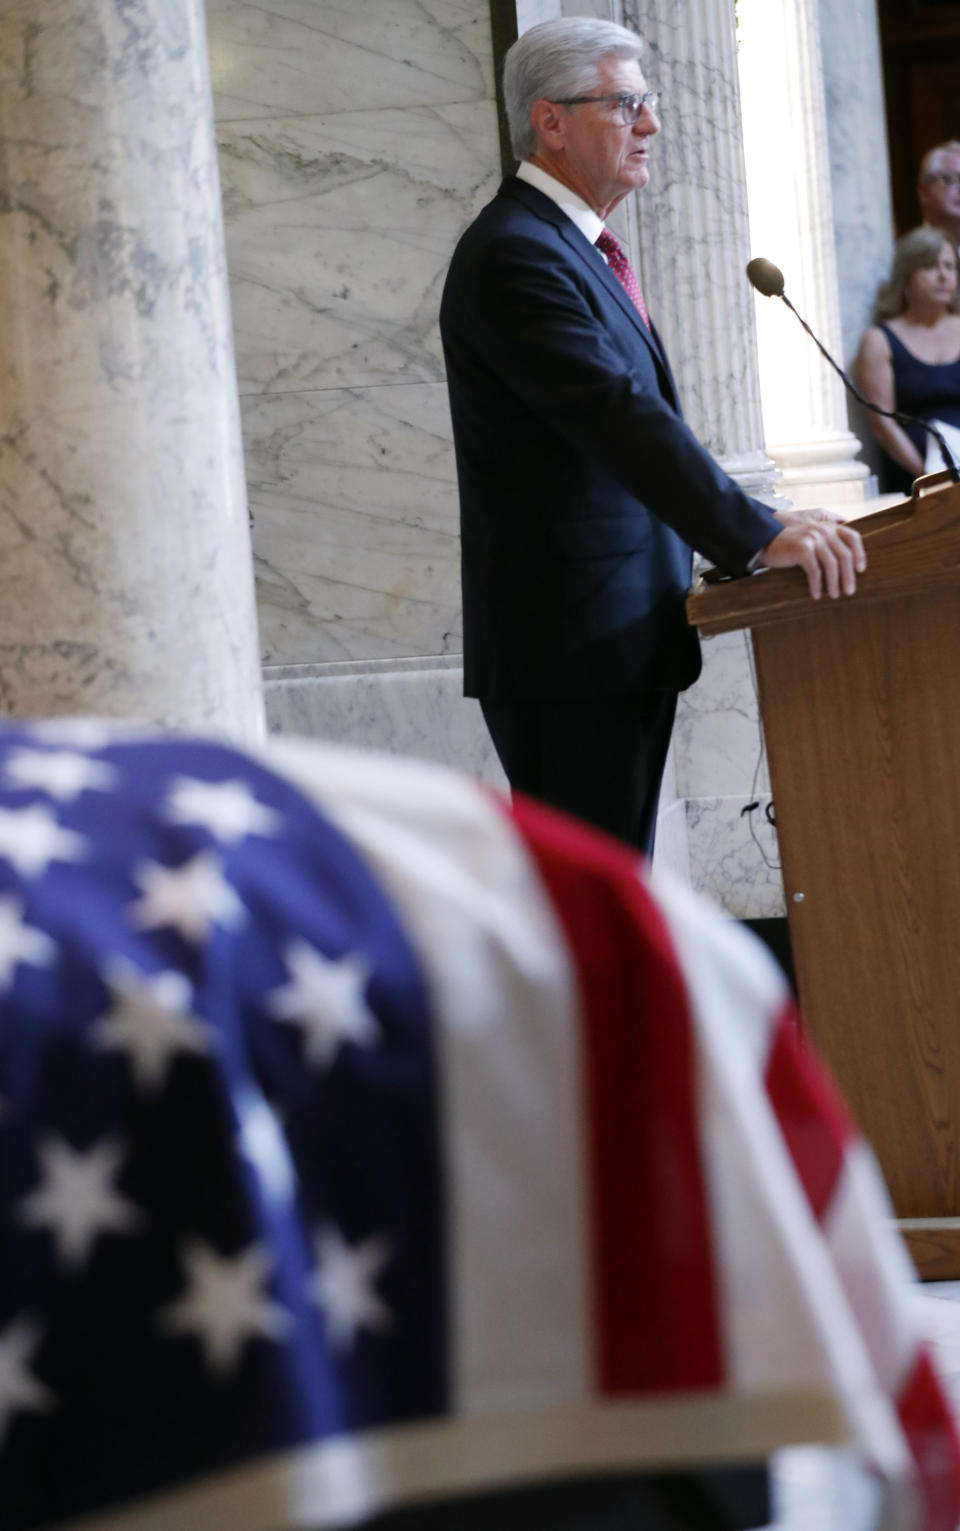 Mississippi Gov. Phil Bryant delivers remarks at the funeral of the late Republican senator Thad Cochran, in the Mississippi State Capitol rotunda in Jackson, Miss., Monday, June 3, 2019. Cochran was 81 when he died Thursday in a veterans' nursing home in Oxford, Miss. He was the 10th longest serving senator. (AP Photo/Rogelio V. Solis)